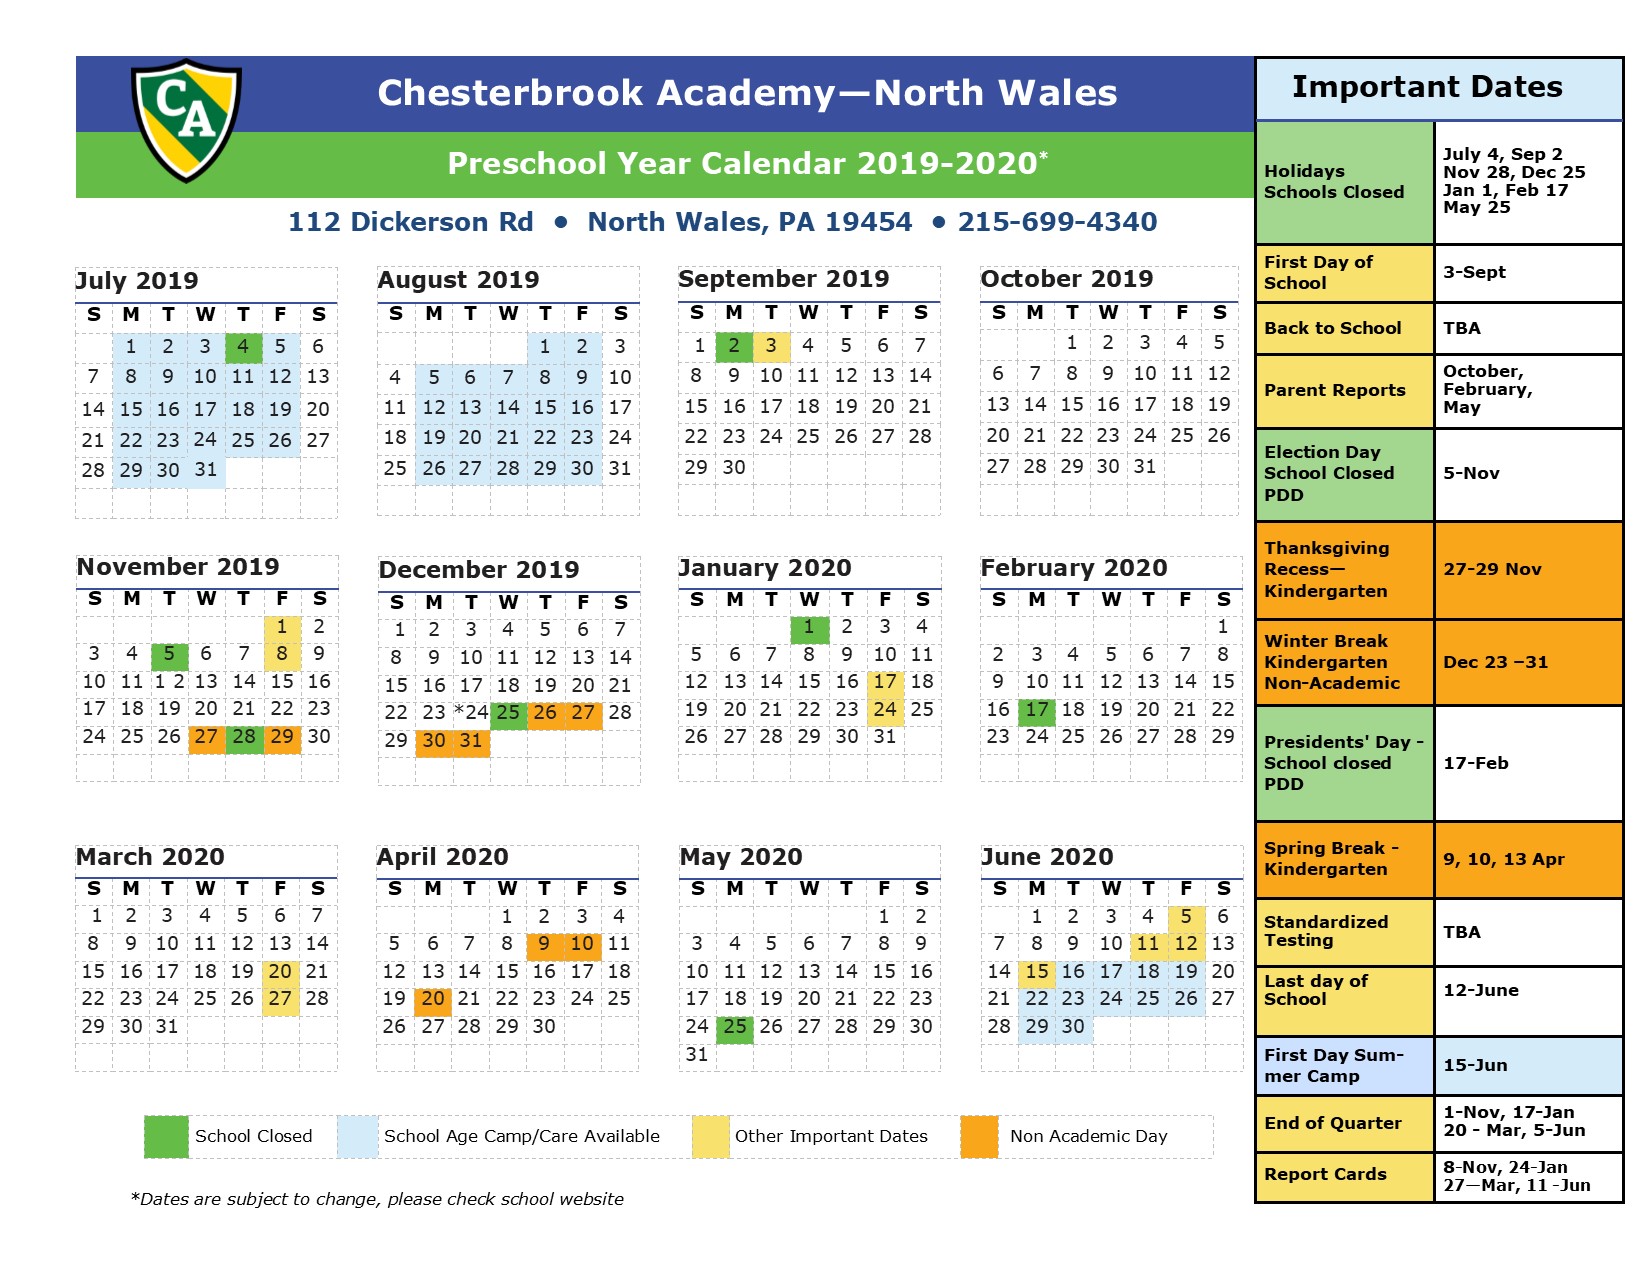 School Year Calendar Chesterbrook Academy North Wales, PA